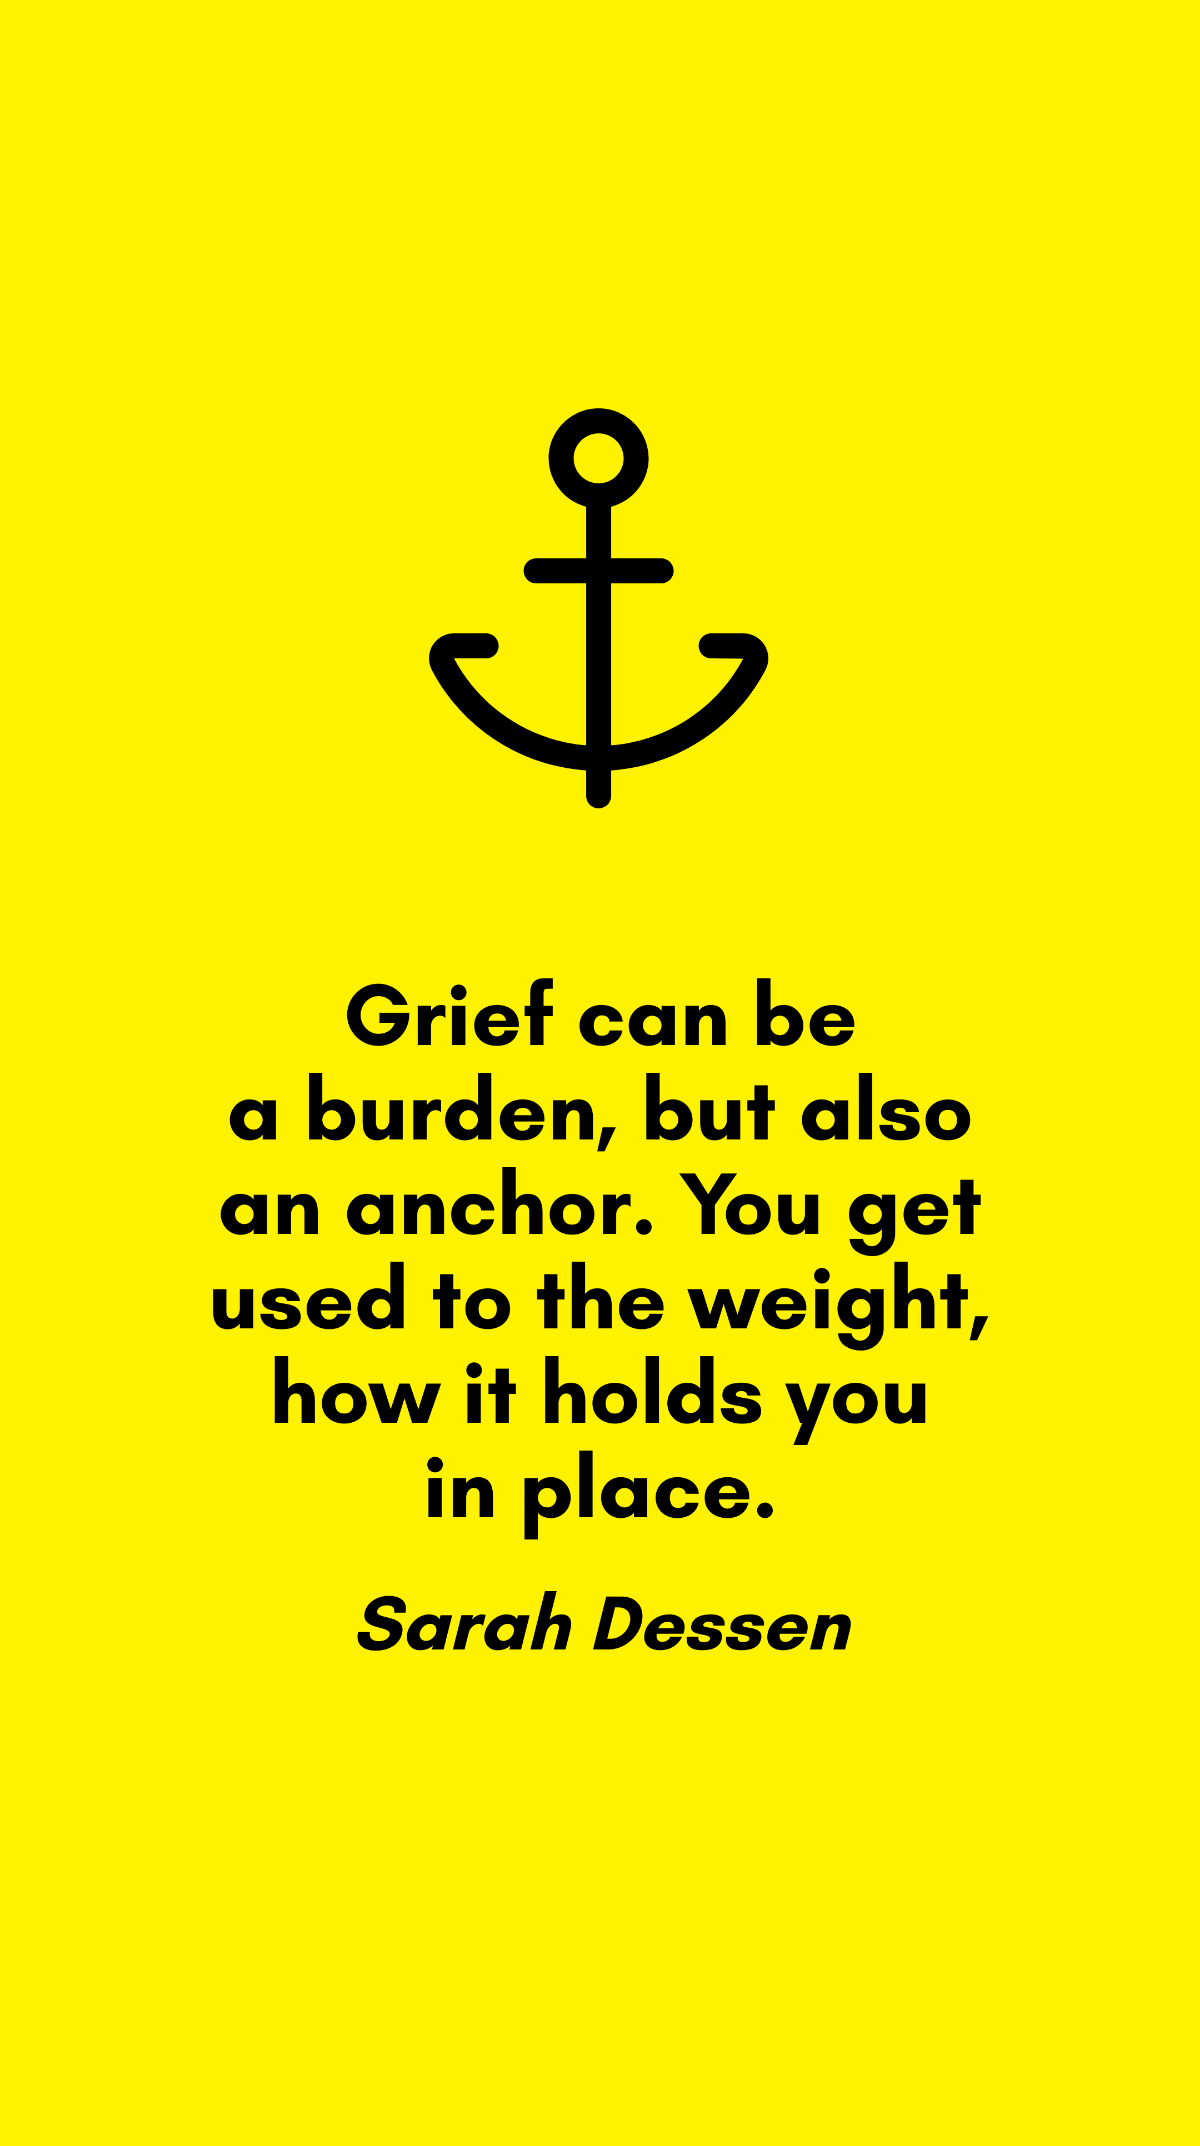 Sarah Dessen - Grief can be a burden, but also an anchor. You get used to the weight, how it holds you in place.